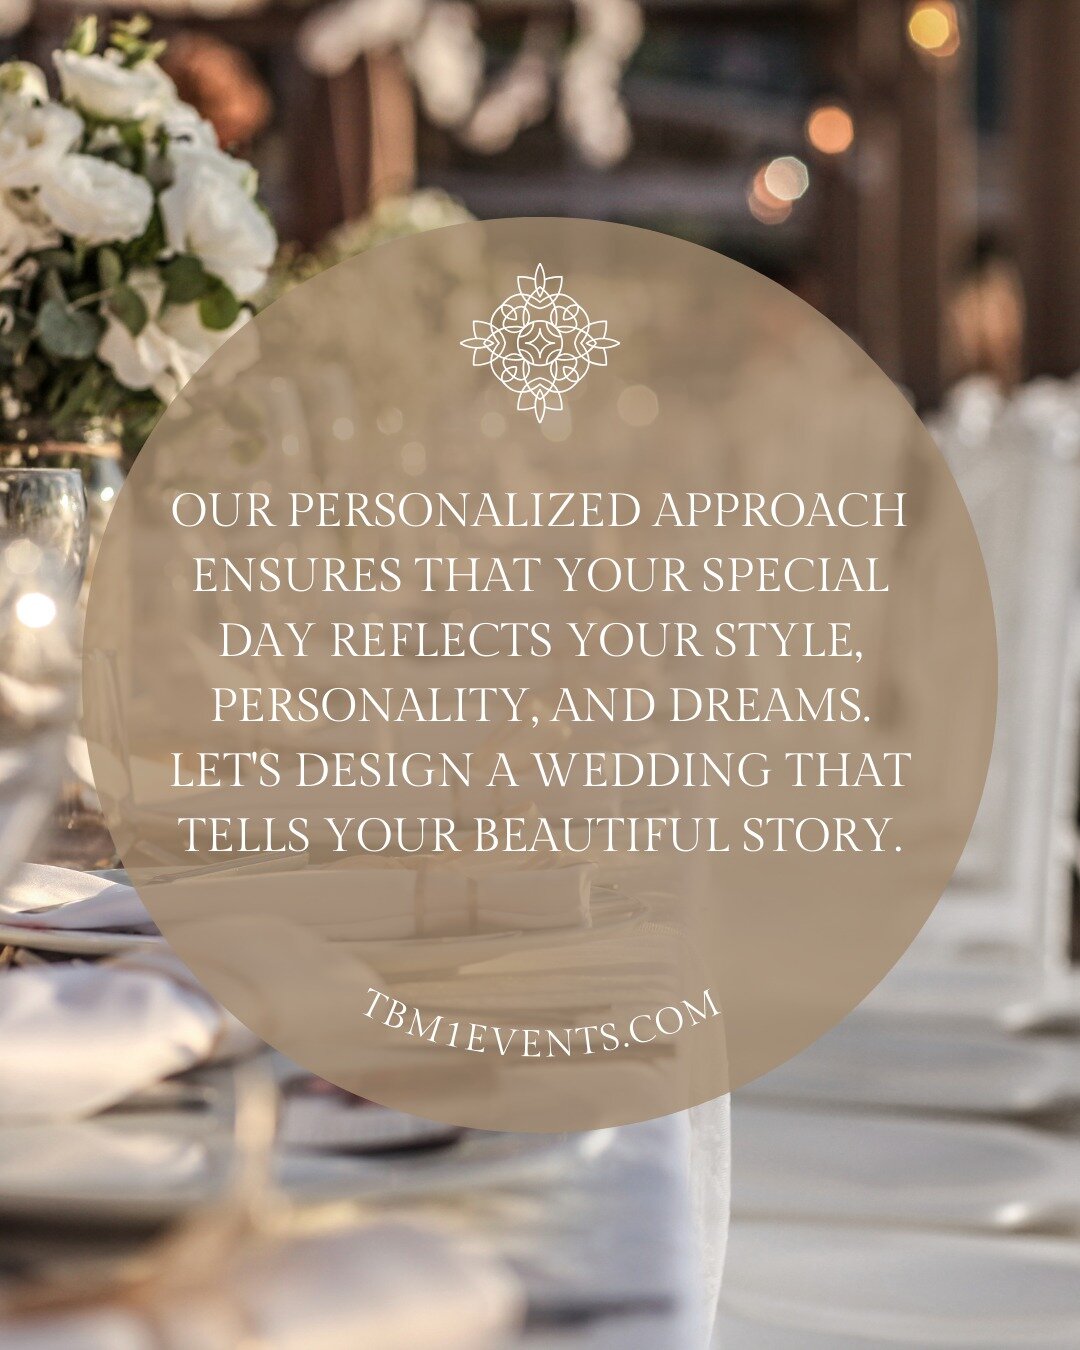 🤩 Let's design a wedding that tells your beautiful story!

#Bride #beautiful #celebrate #weddingday #love #desmoines #Weddings #eventplanning #instagood #tbment #lookgoodfeelgood #Events #Planning